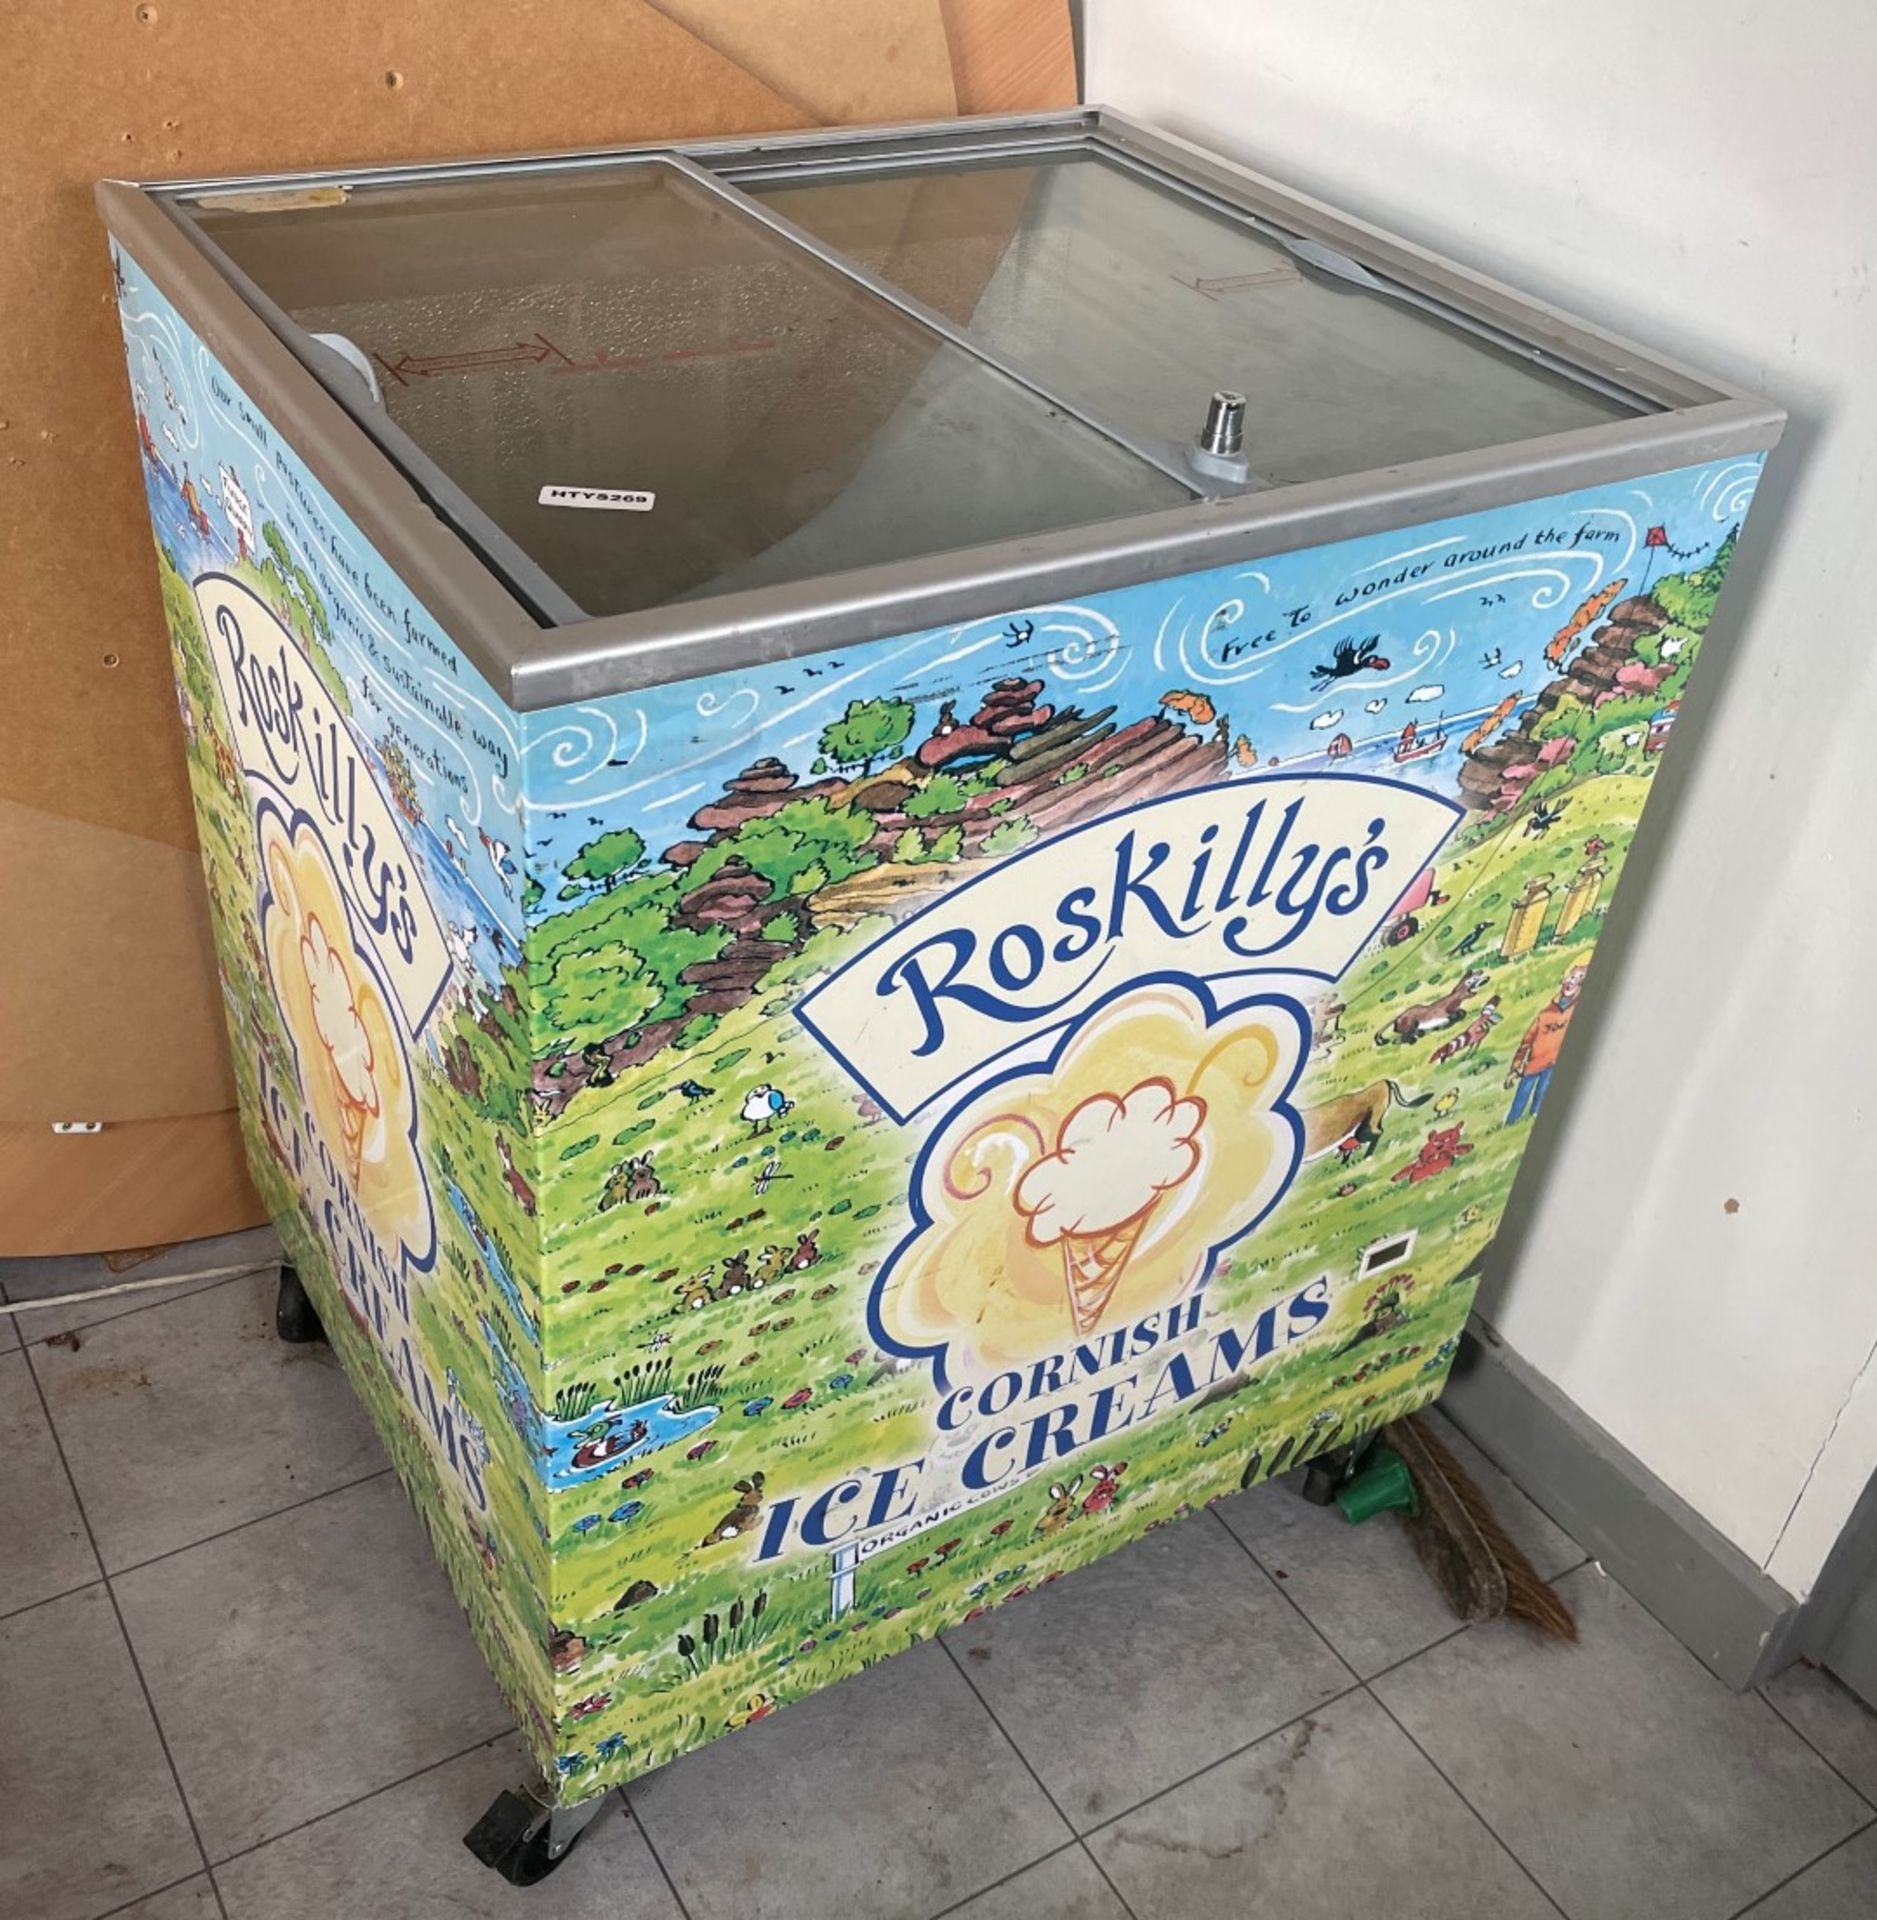 1 x Tefcold Ice Cream Freezer With Roskiss Decal Graphics - Size: 73 x 63 cms - Ref: HTYS269 - CL782